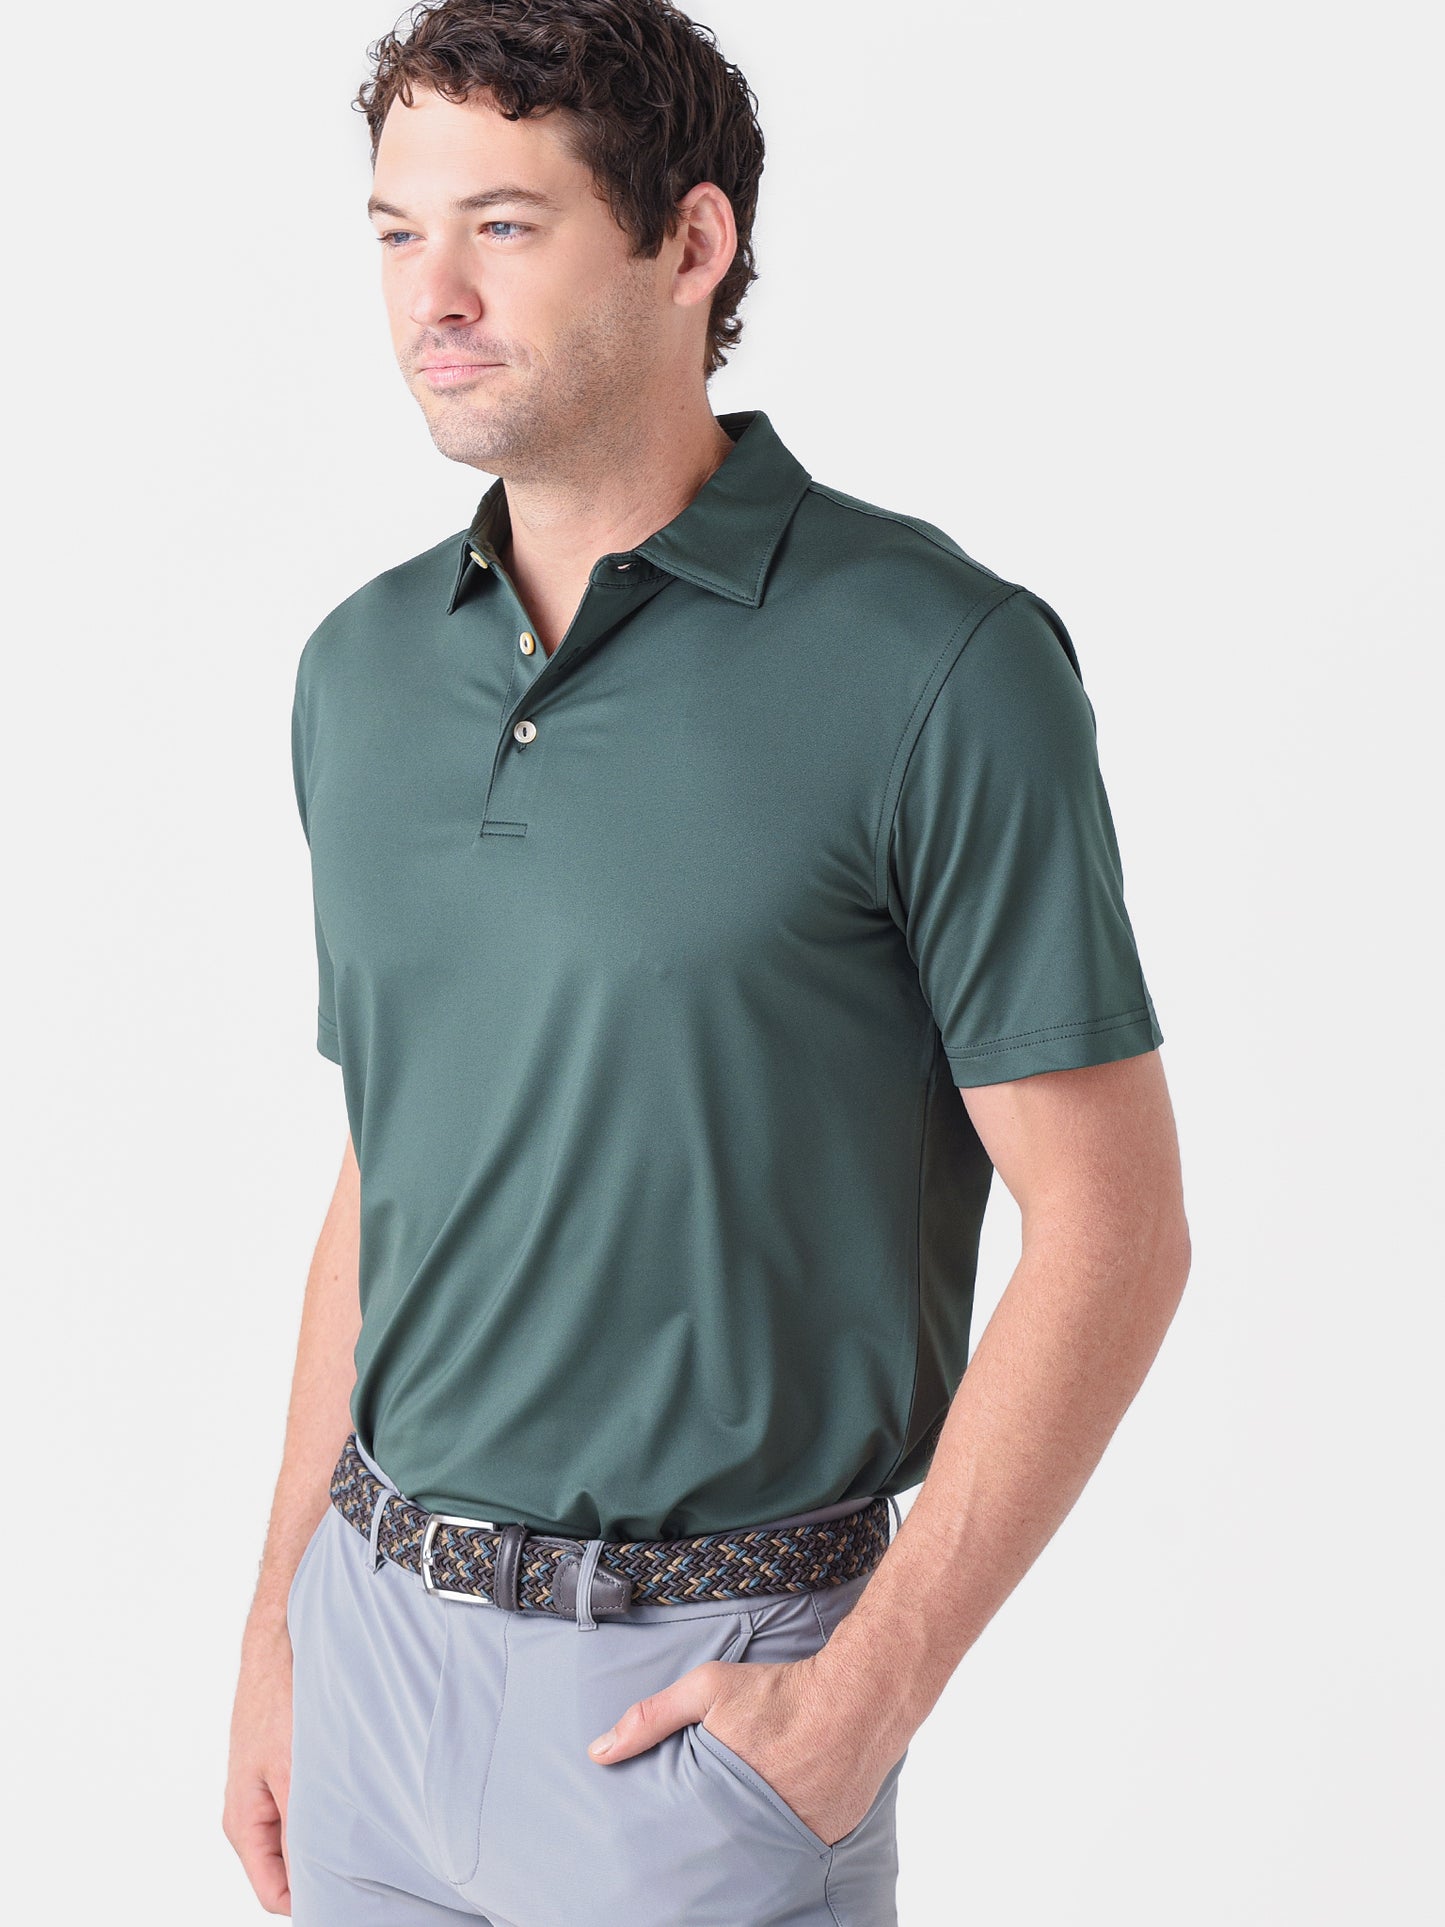 Peter Millar Crown Sport Men's Solid Performance Polo